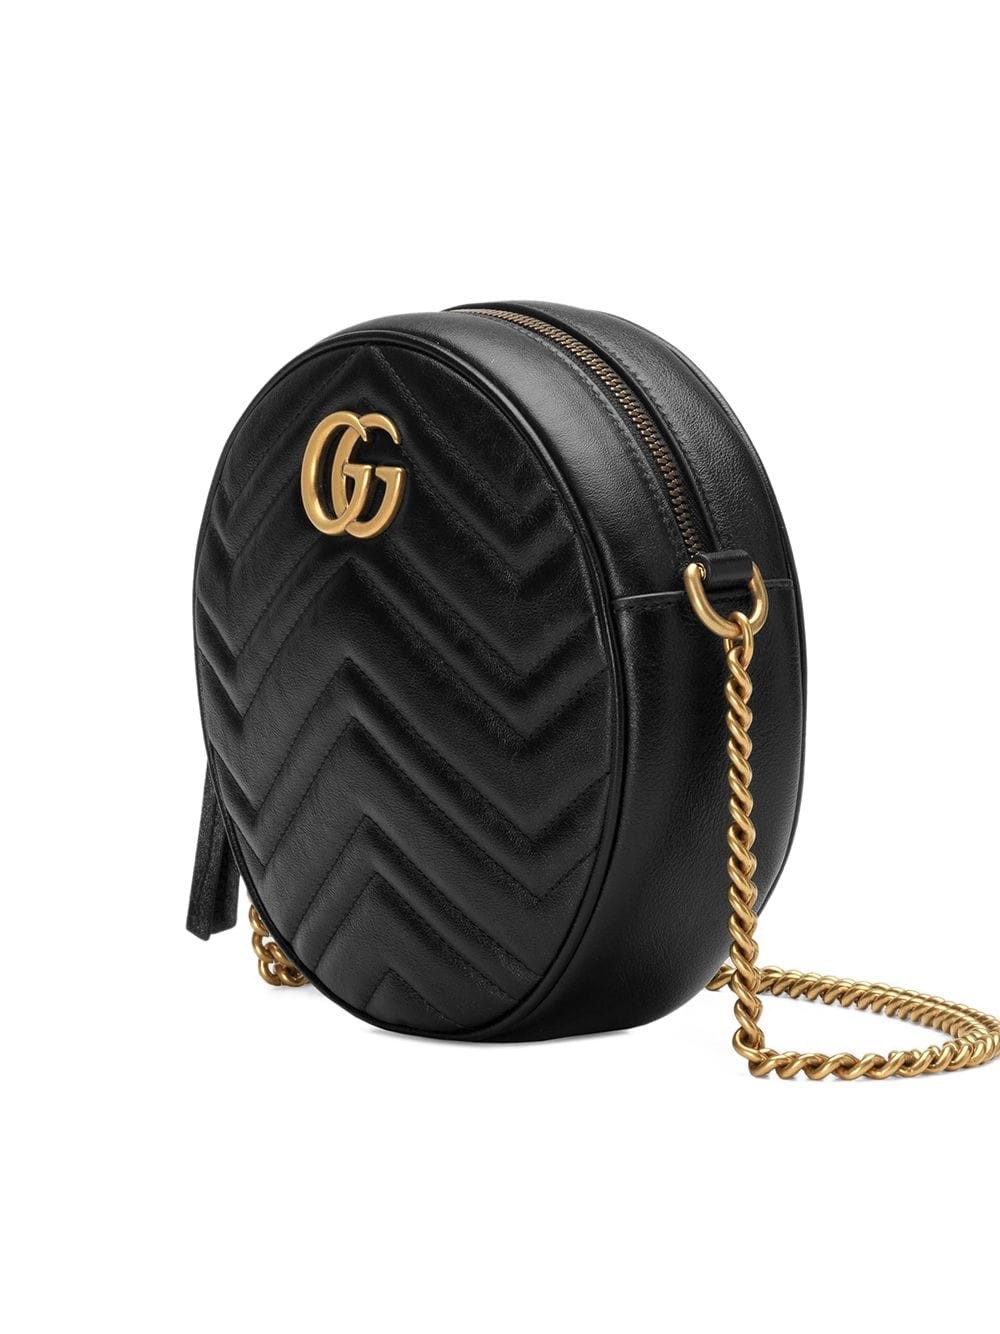 gucci GG MARMONT ROUND BAG available on www.bagssaleusa.com - 27417